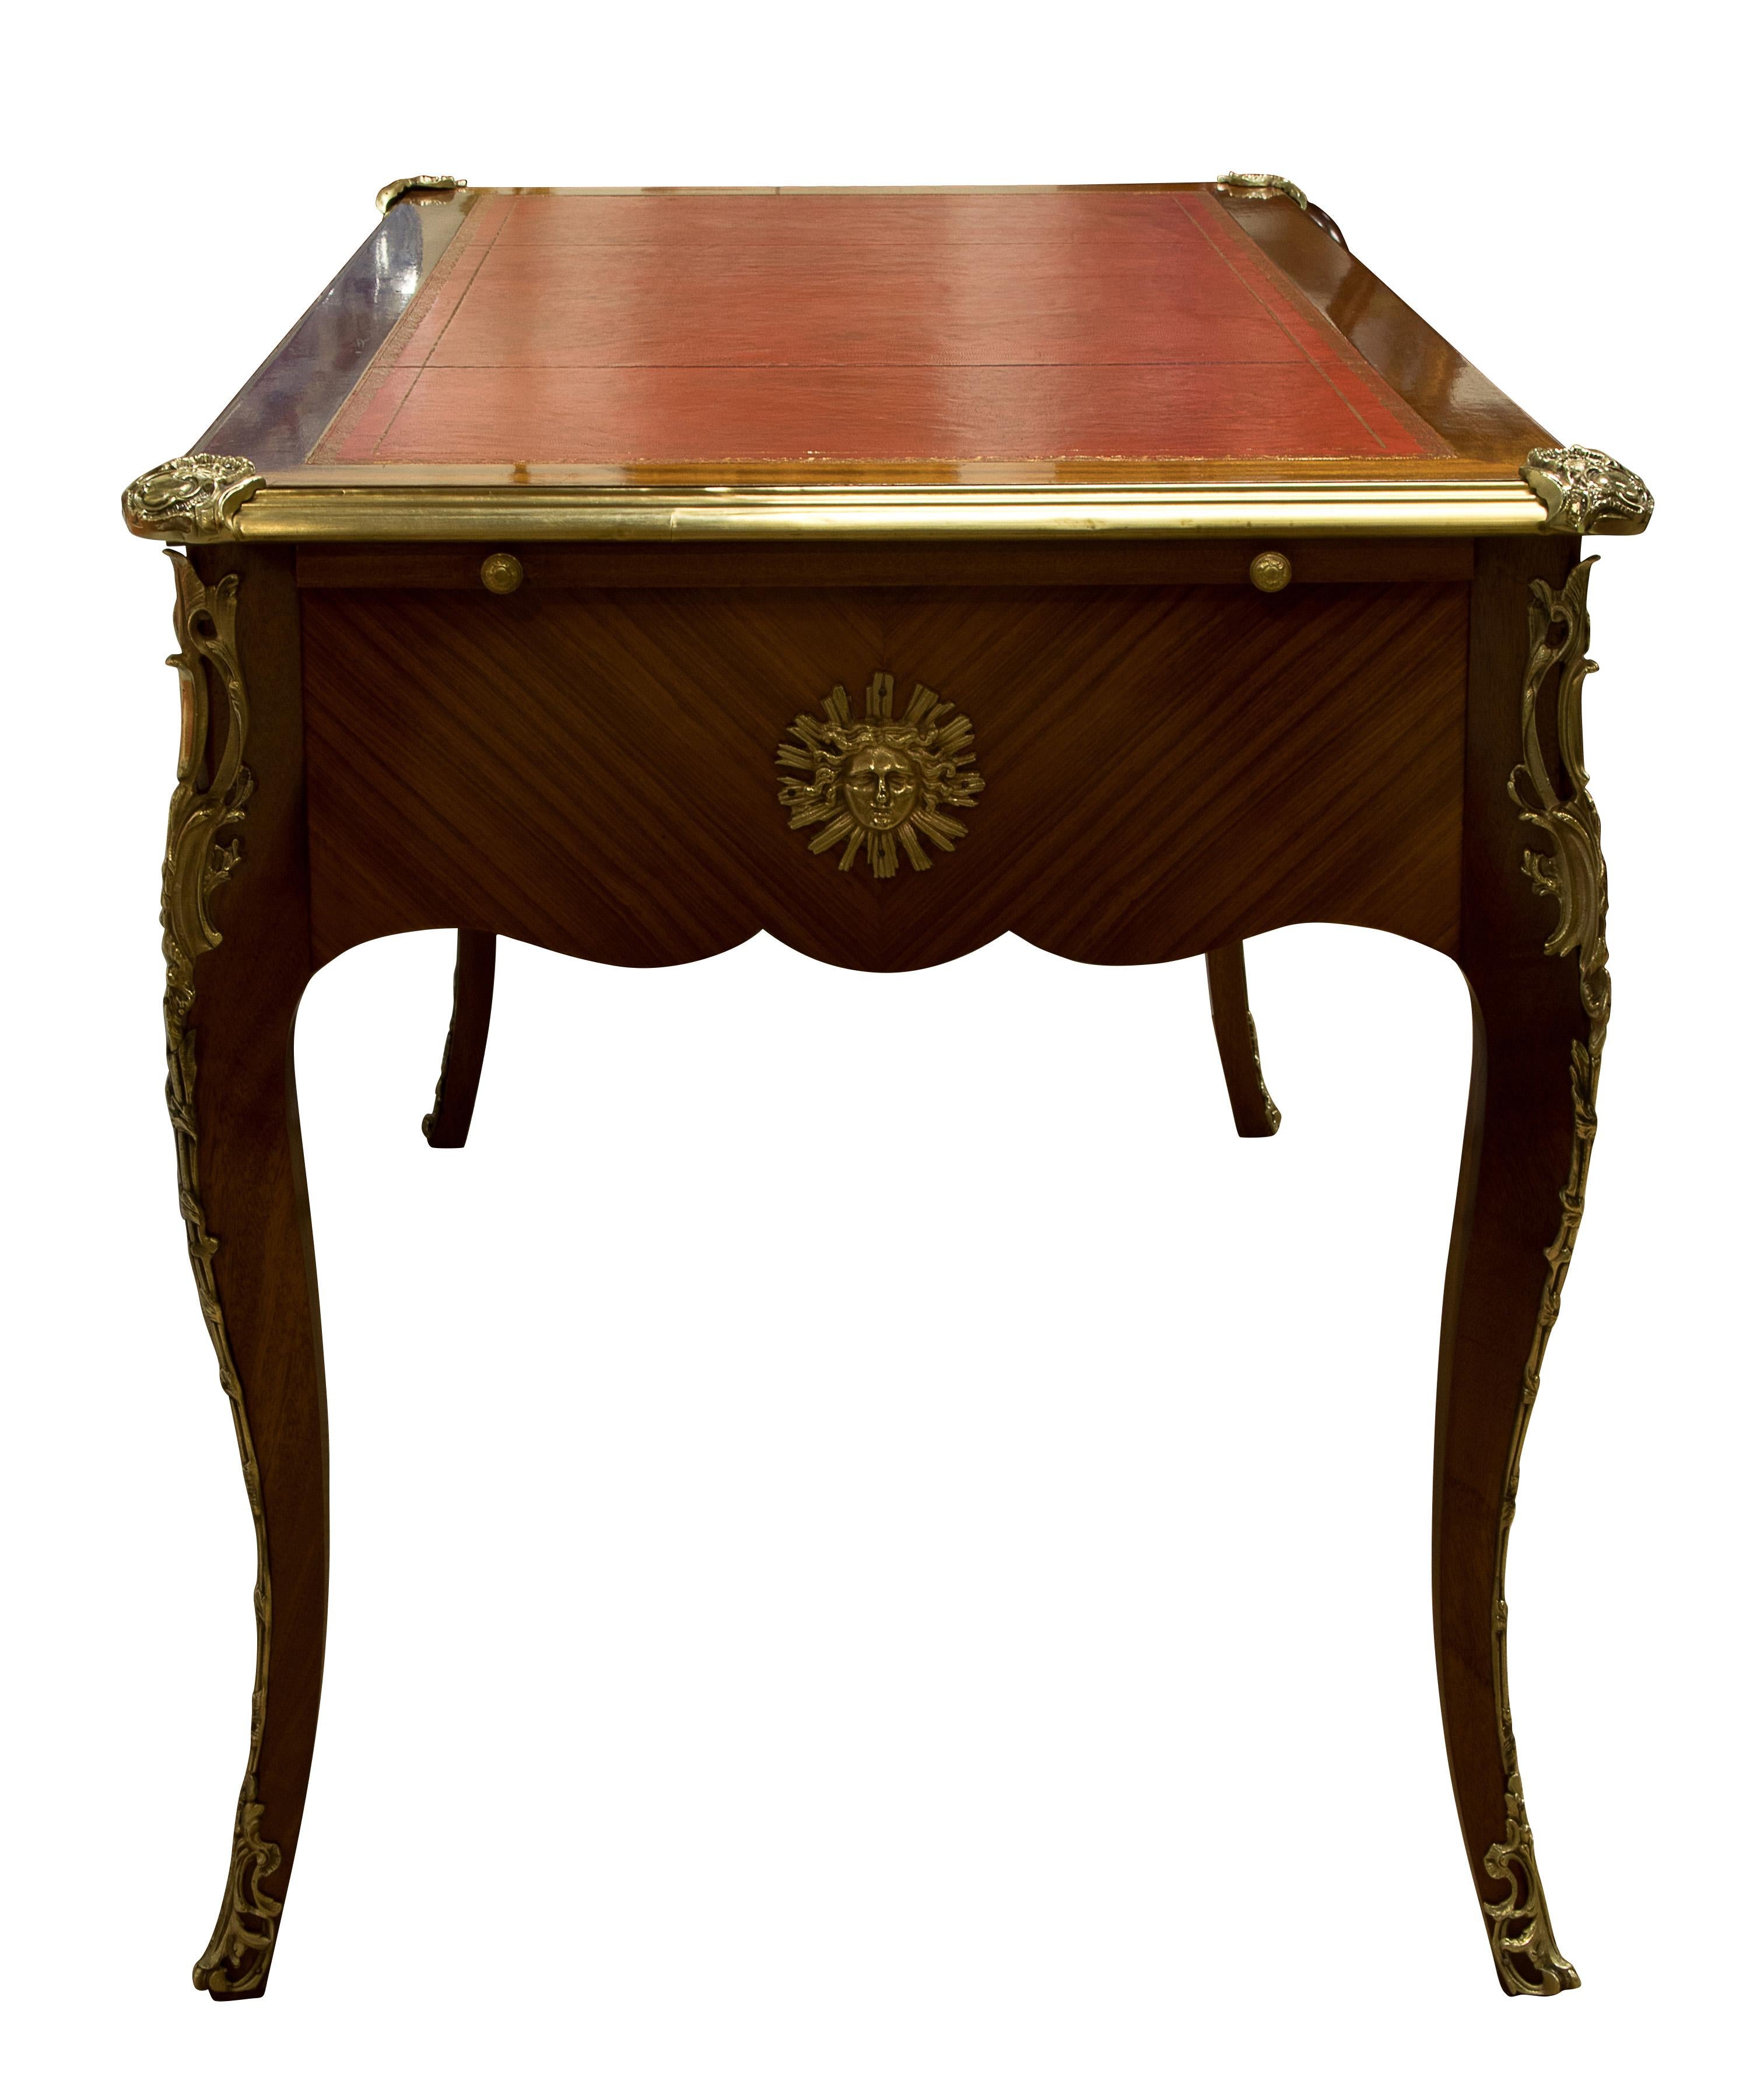 Late 19th century French Tulip wood and mahogany bureau-plat with gilt tooled leather skiver.